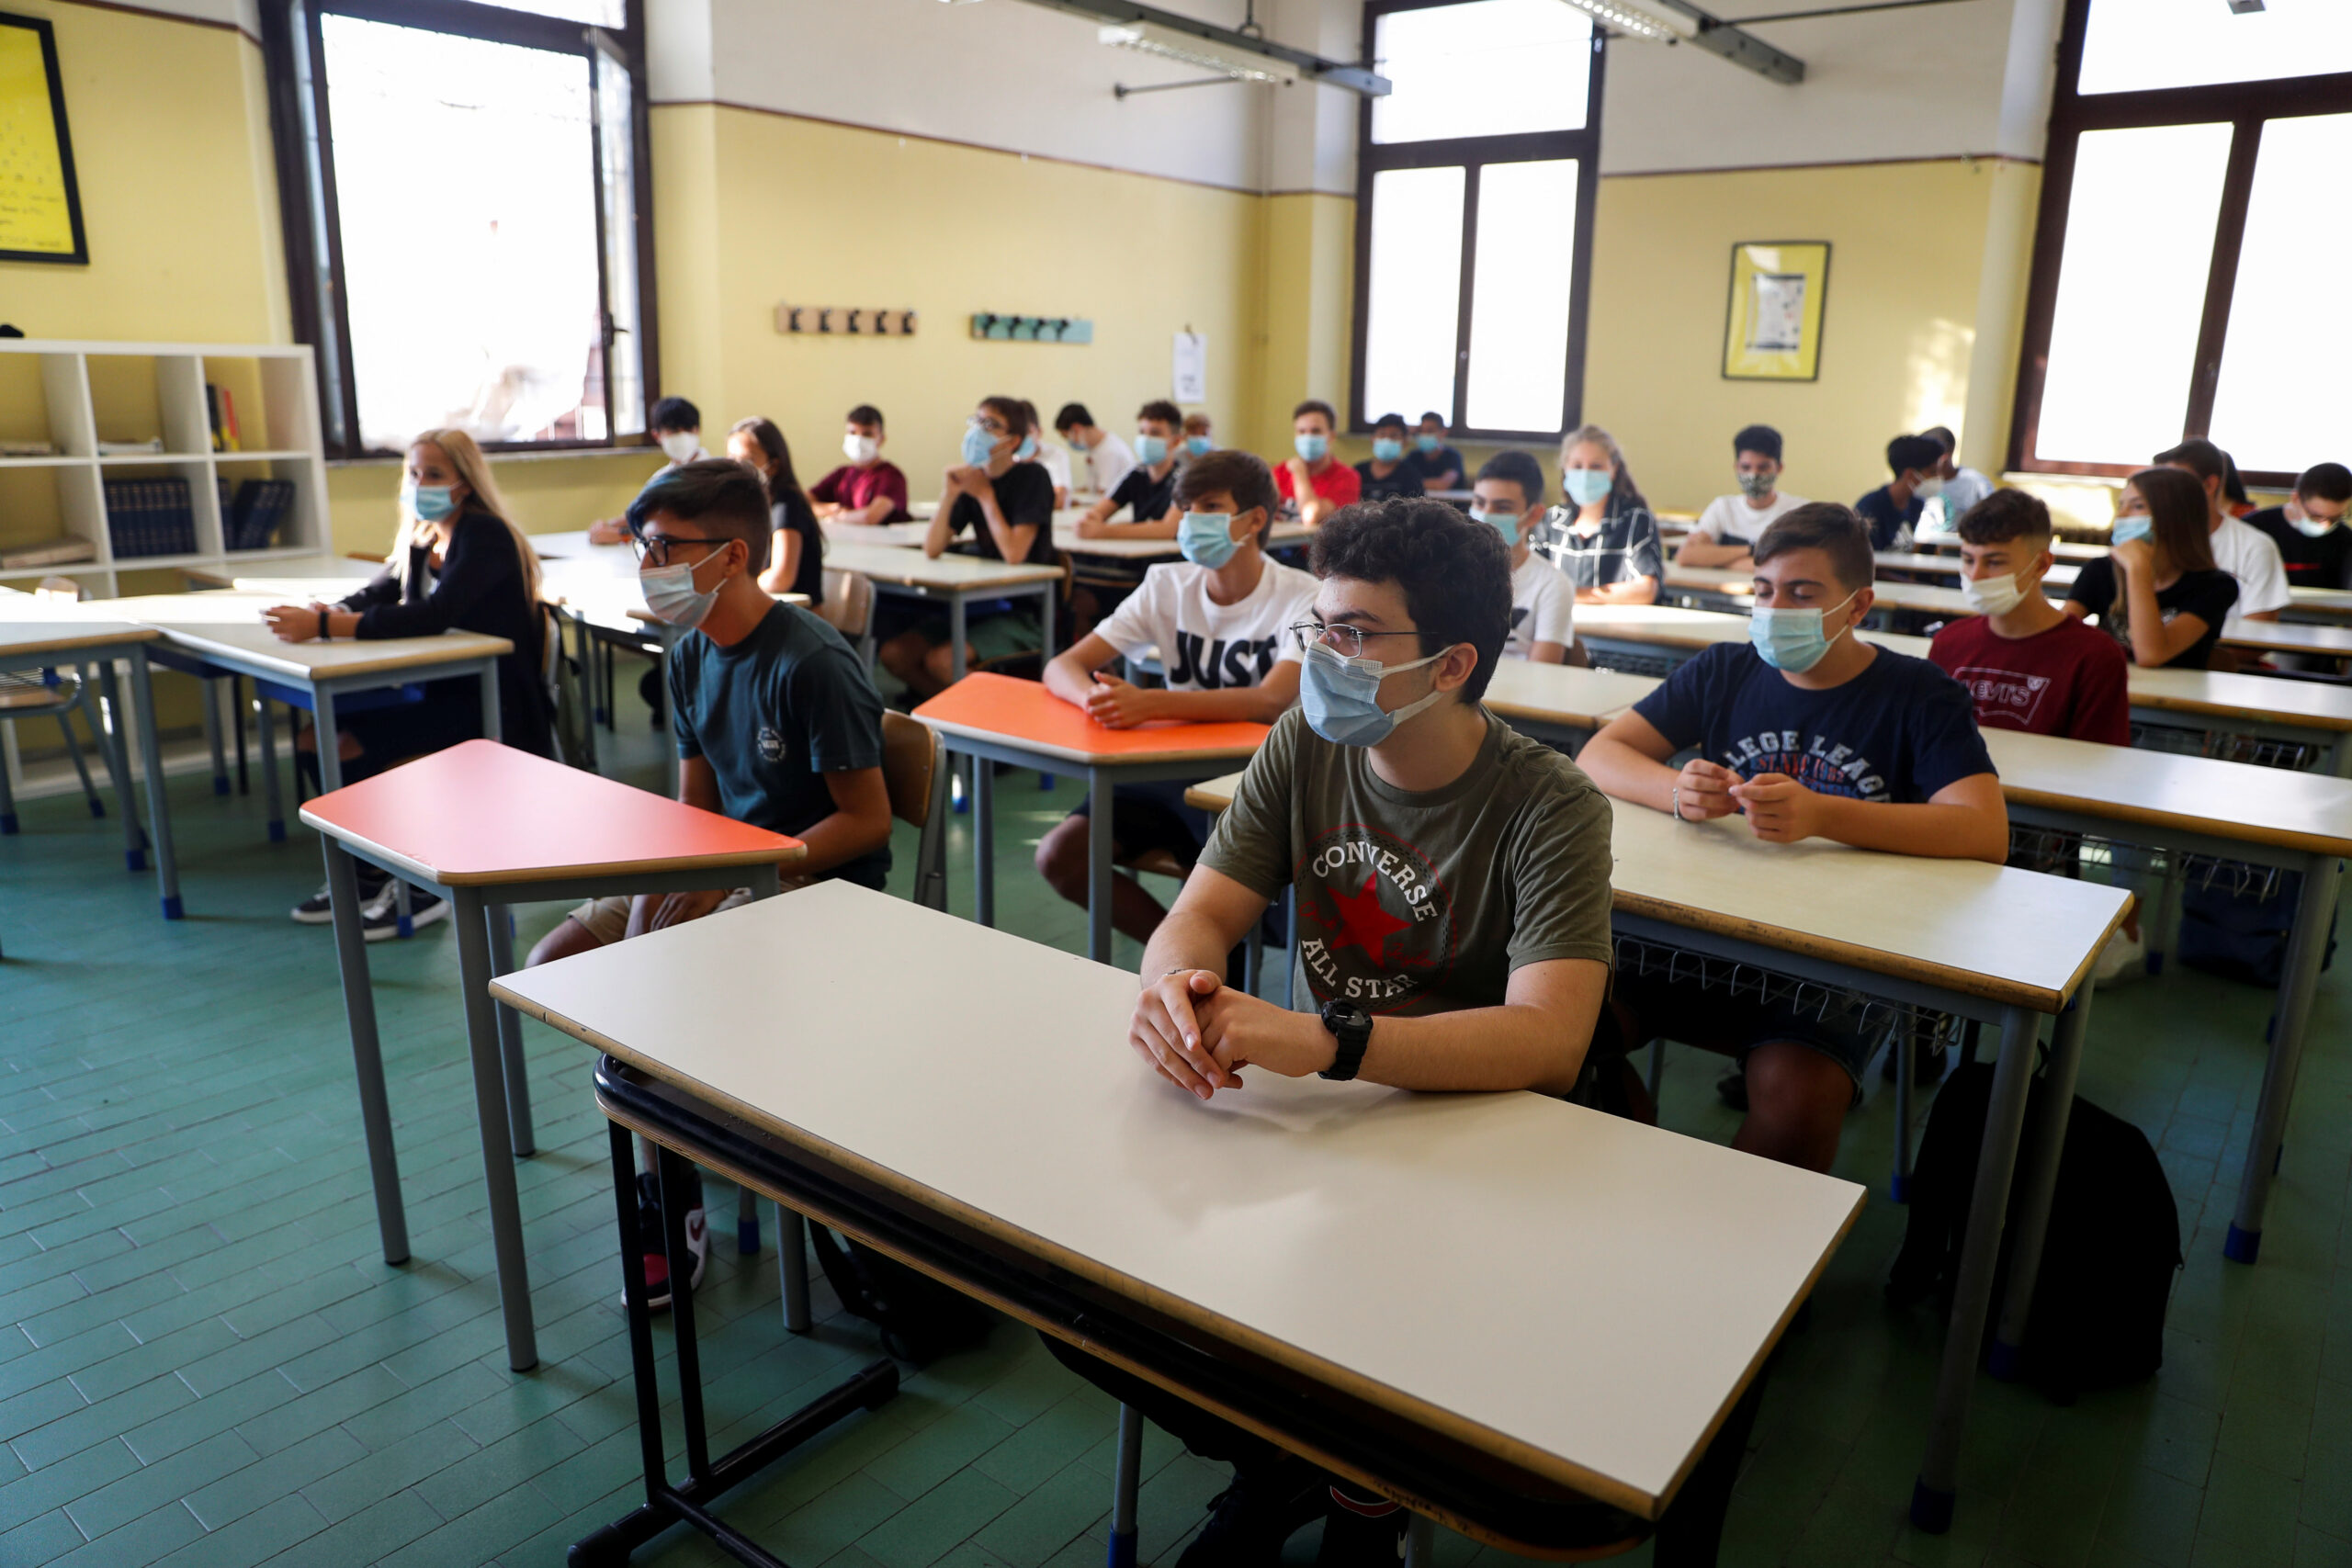 Education in Italy: old and new challenges for schools